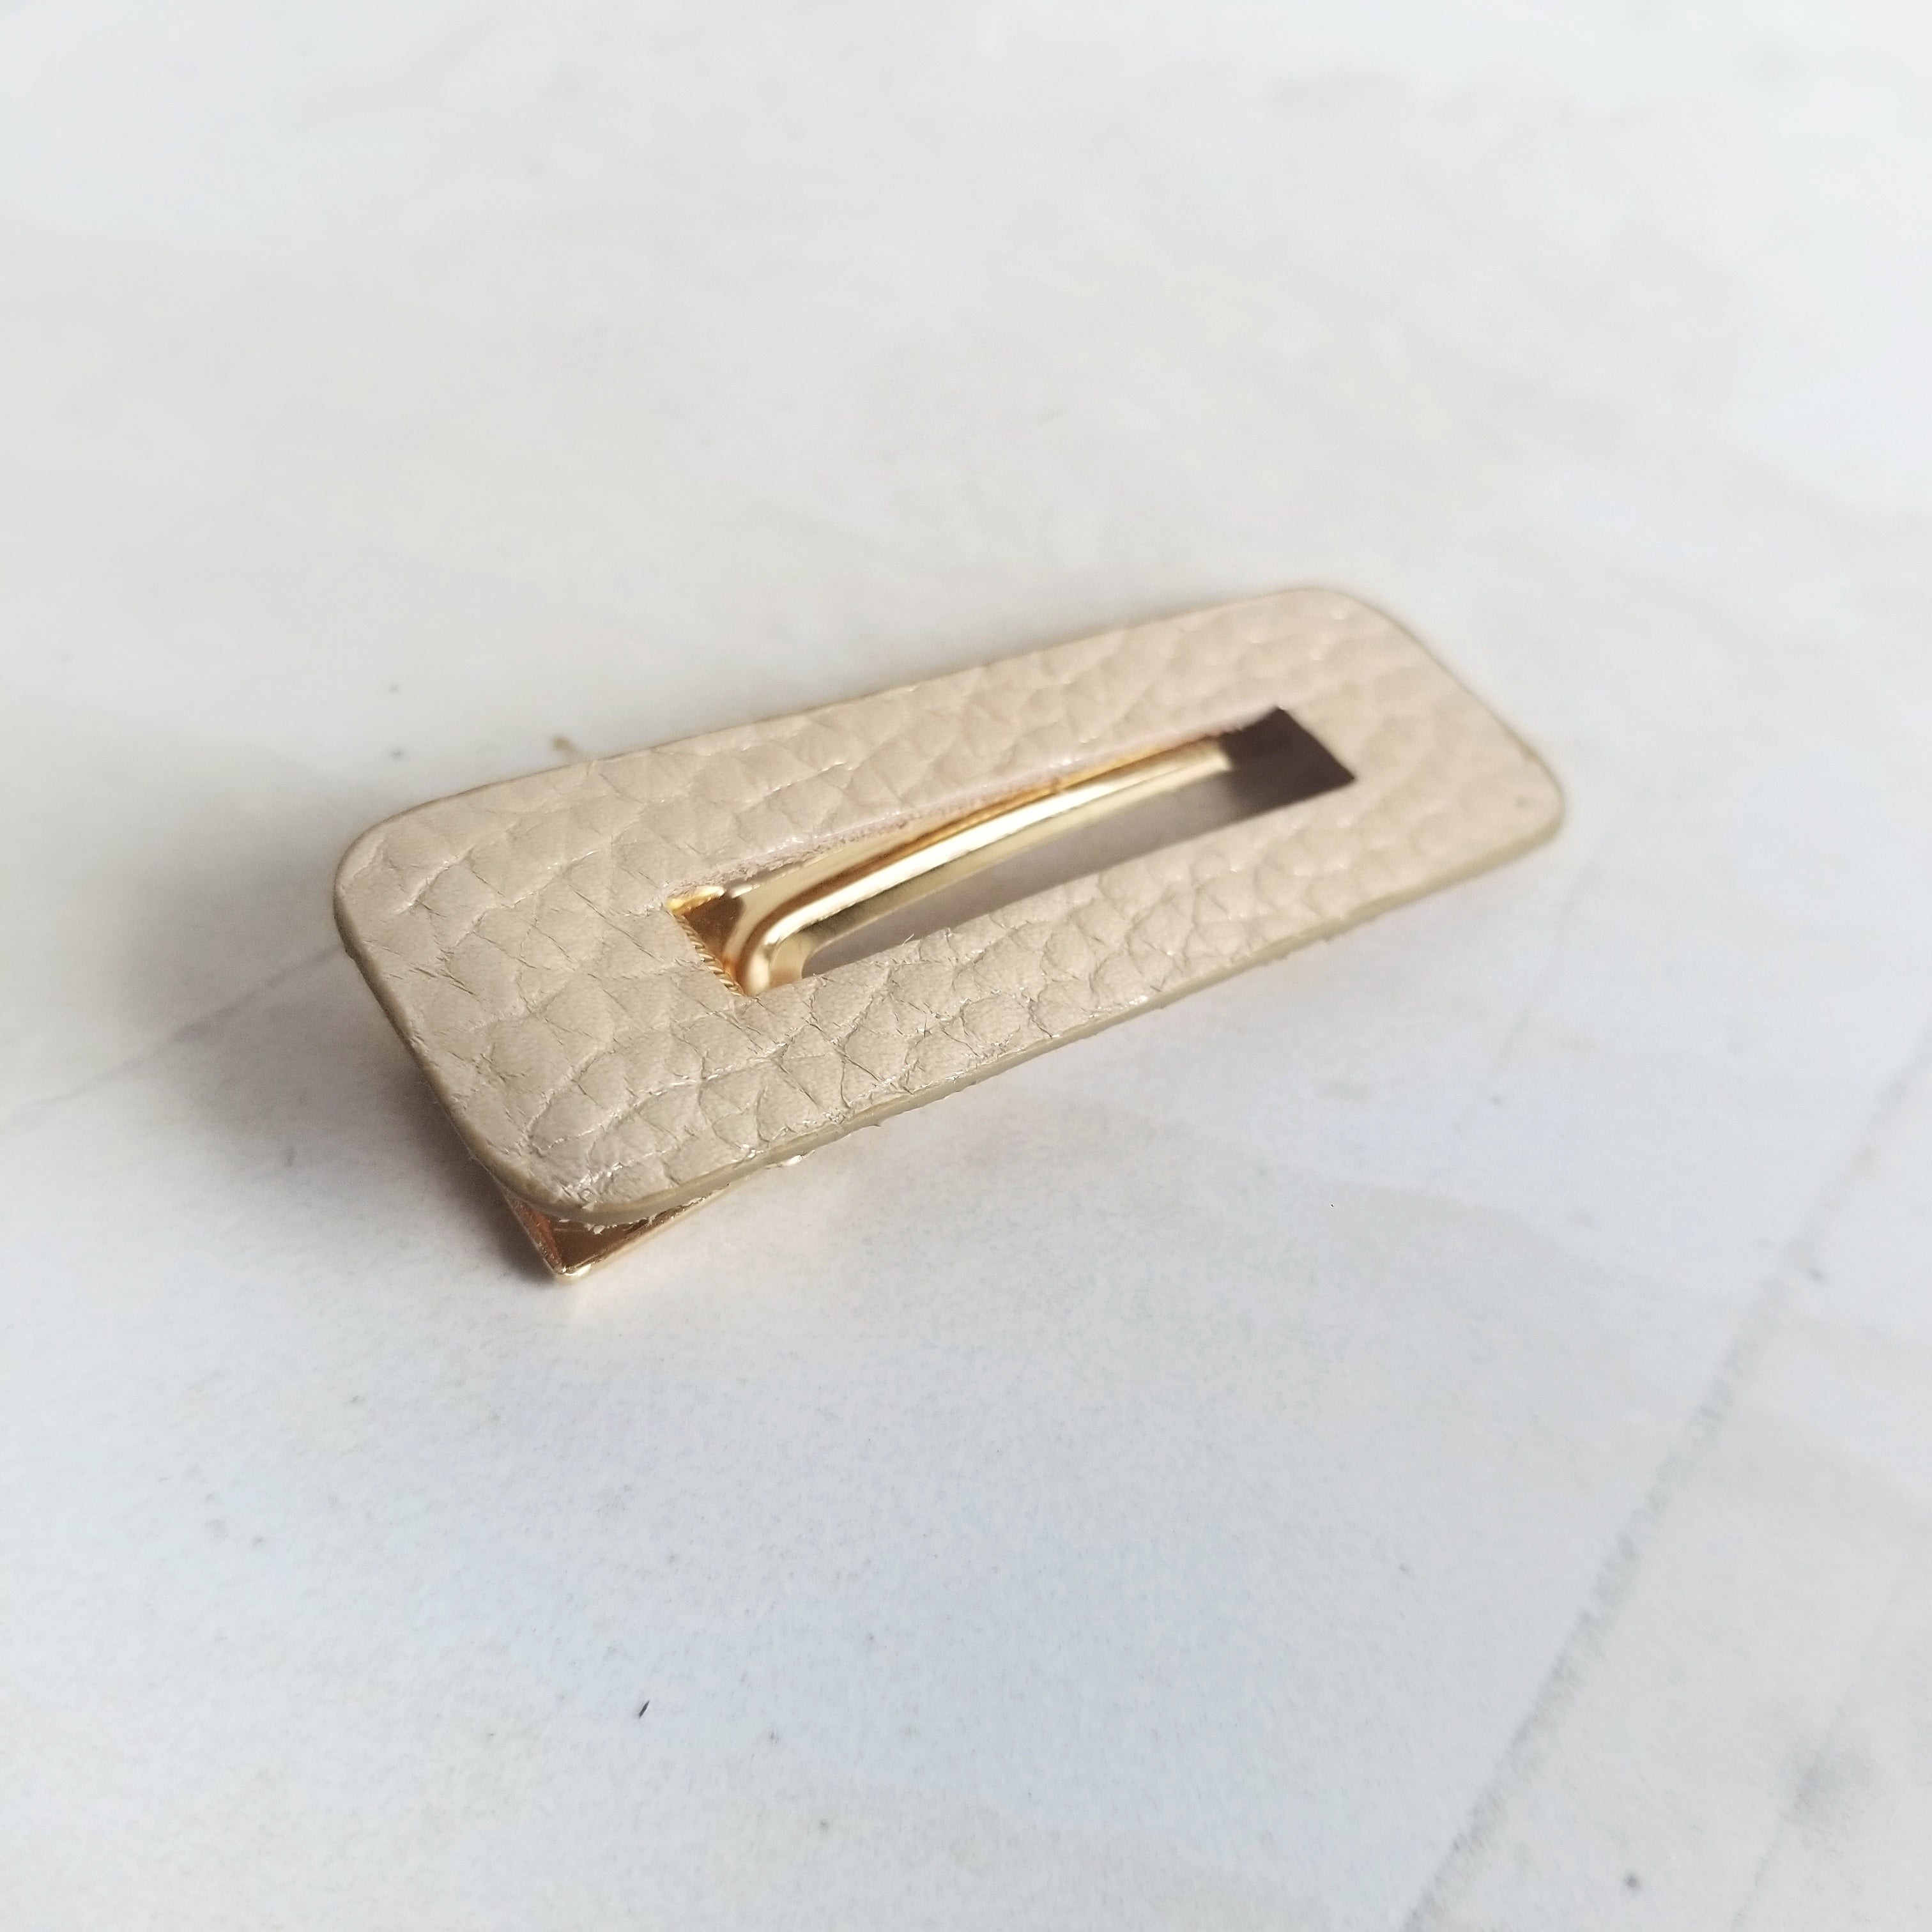 Gold Leather Hair Clip